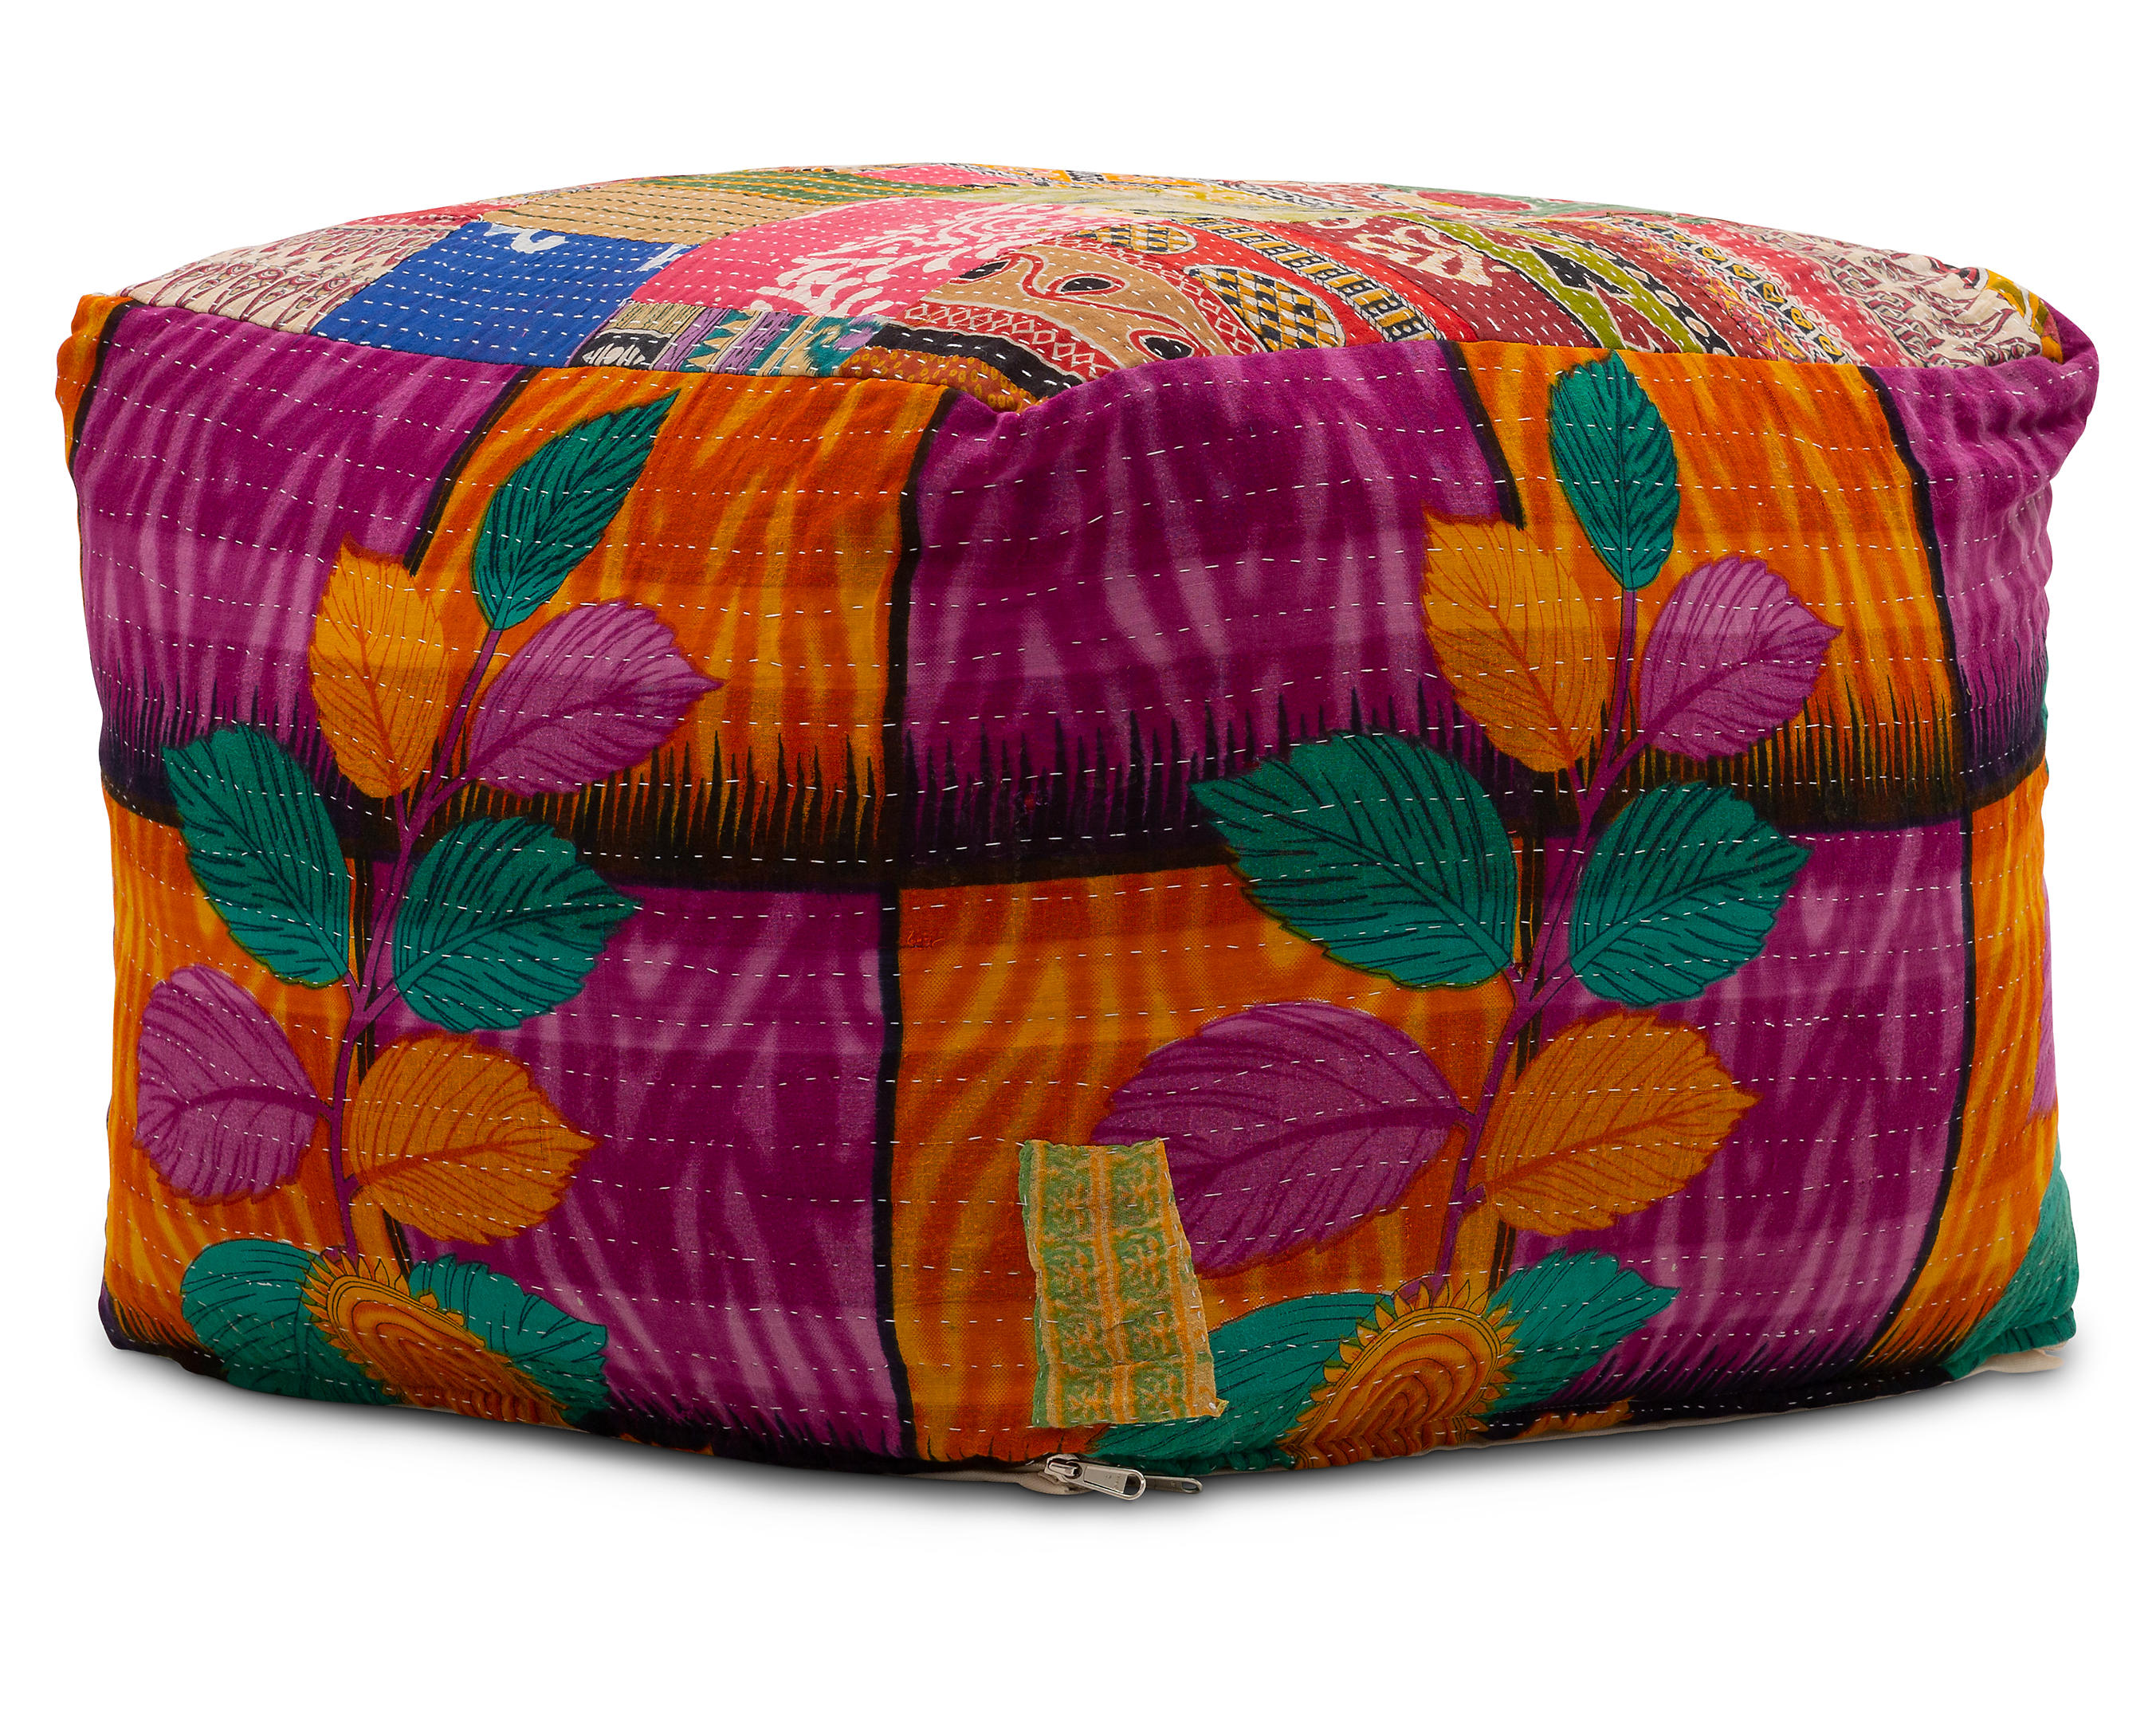 Hand-Embroidered Patchwork Ottoman Footstool - Purple Patches